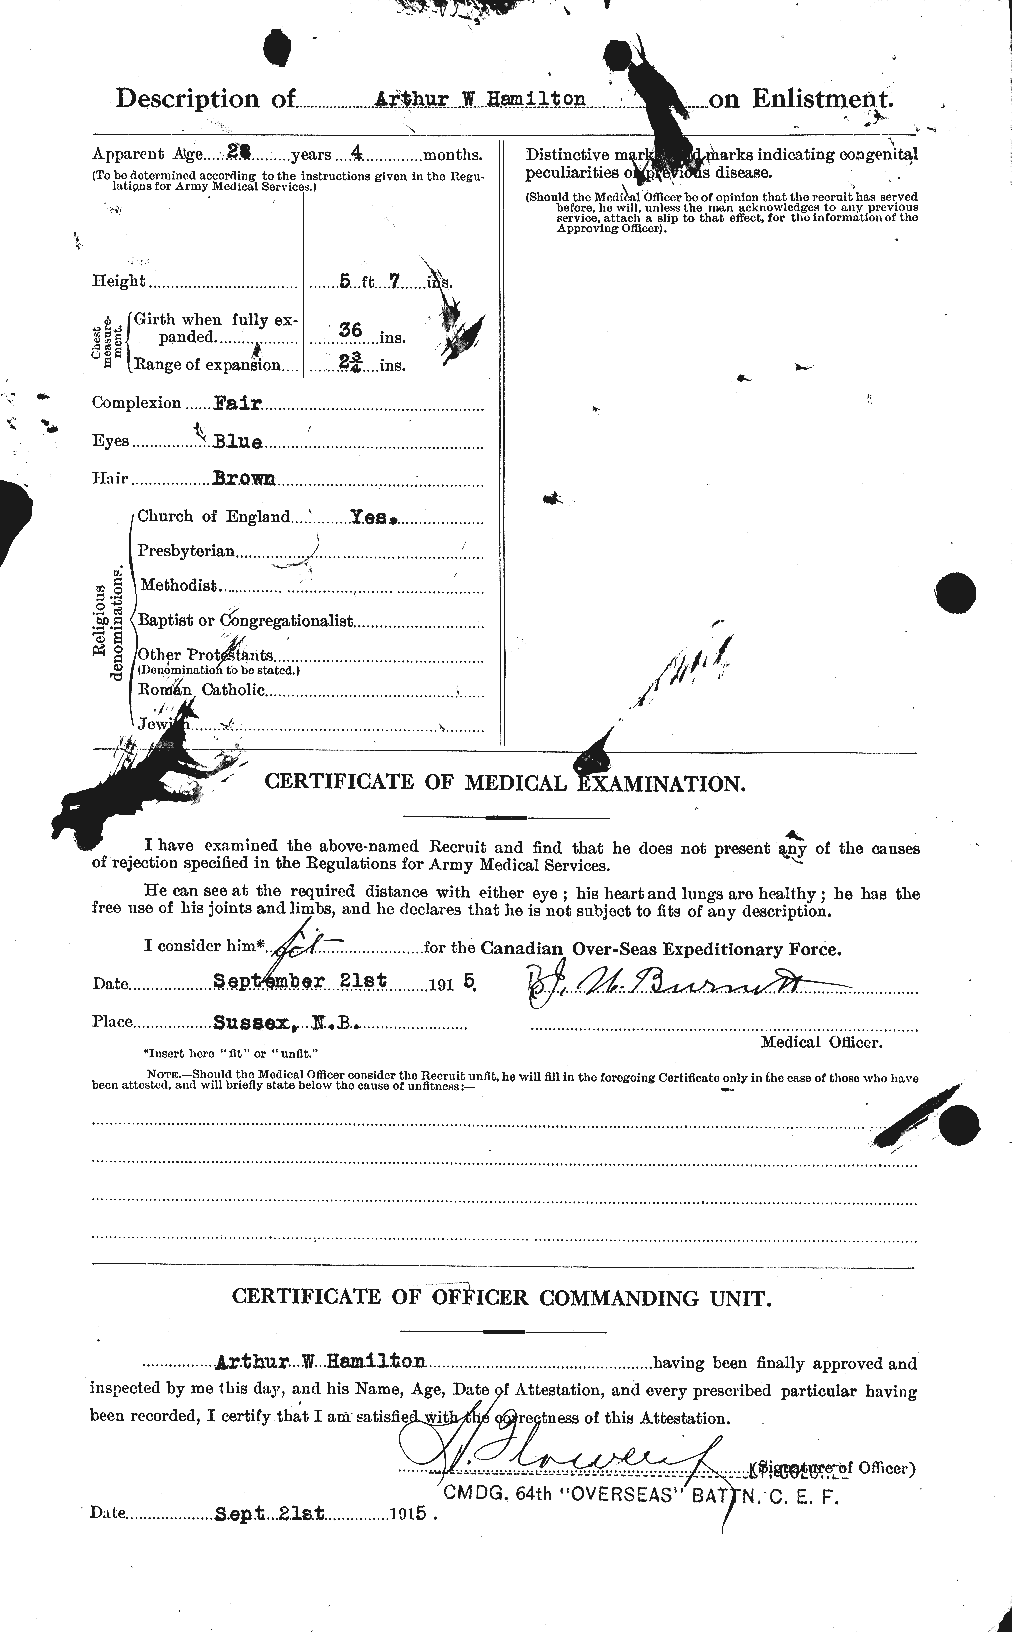 Personnel Records of the First World War - CEF 375257b